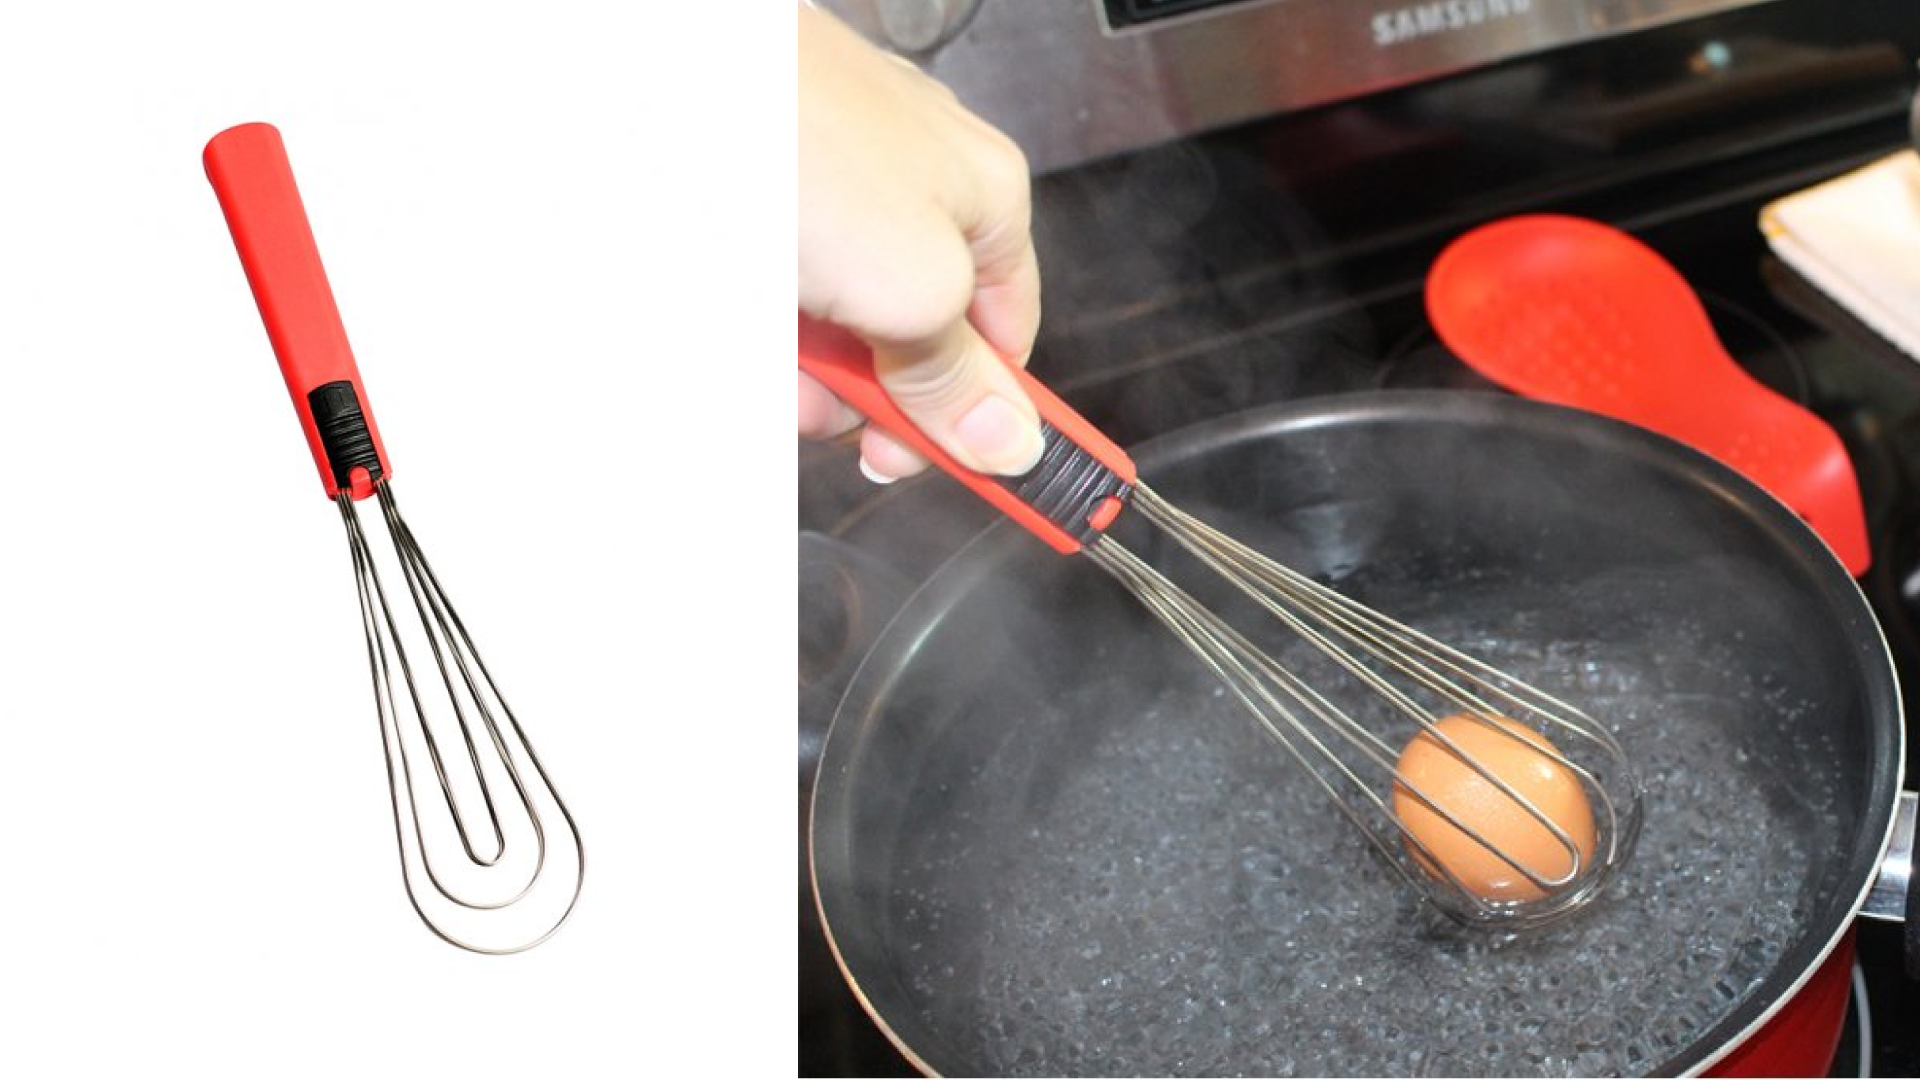 tongs that can also whisk